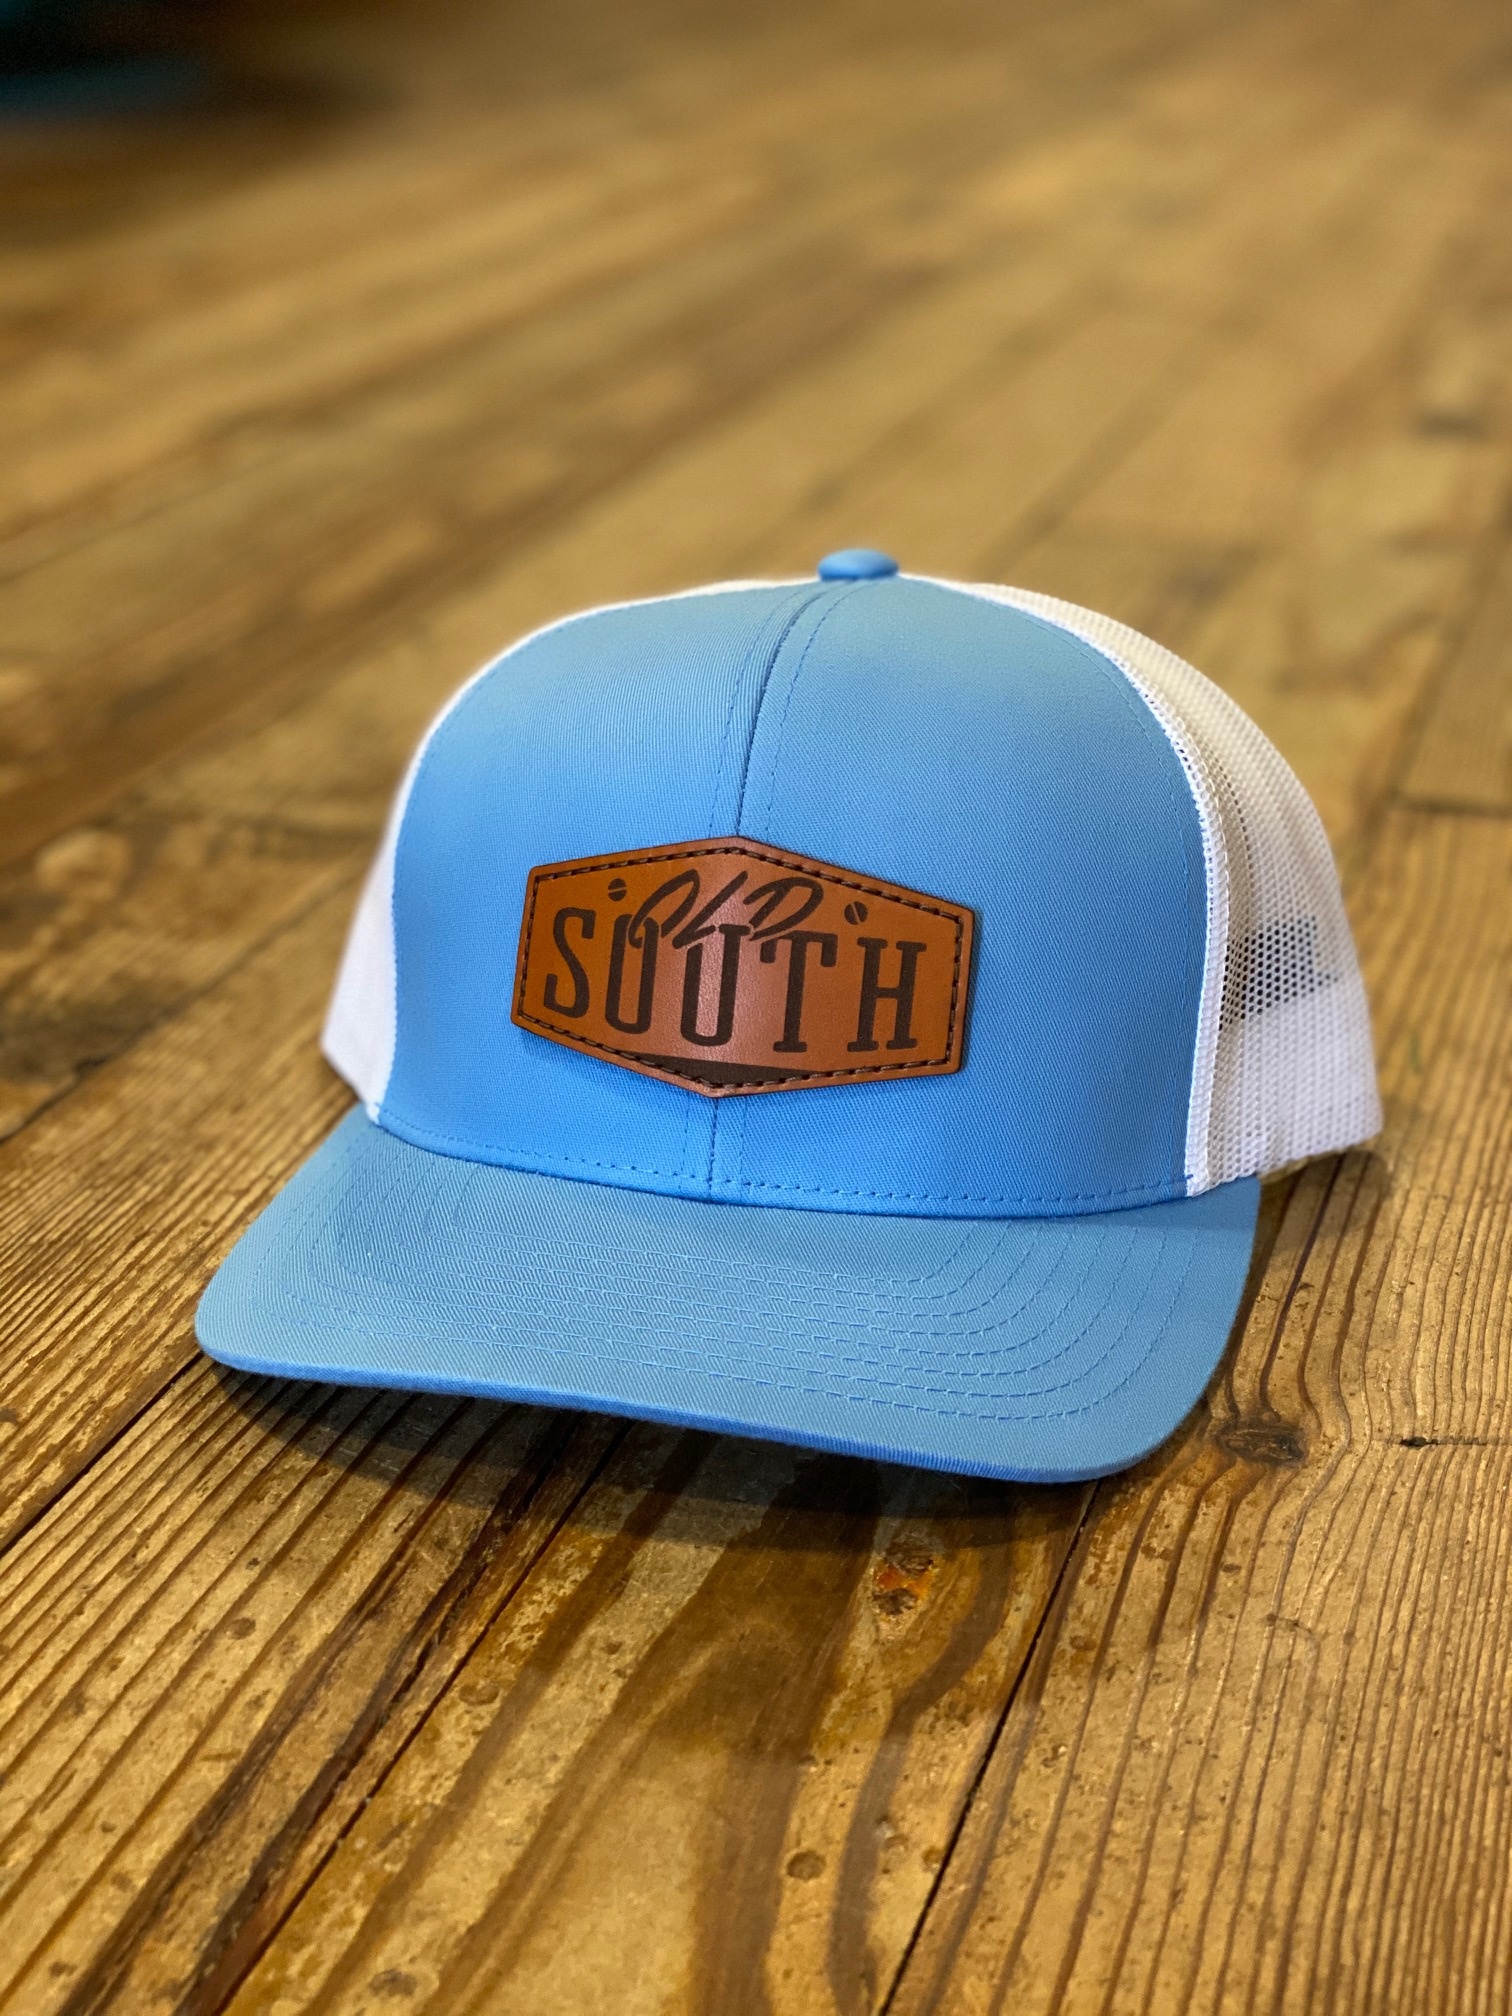 Old South Old South Leather Patch Trucker Hat Carolina